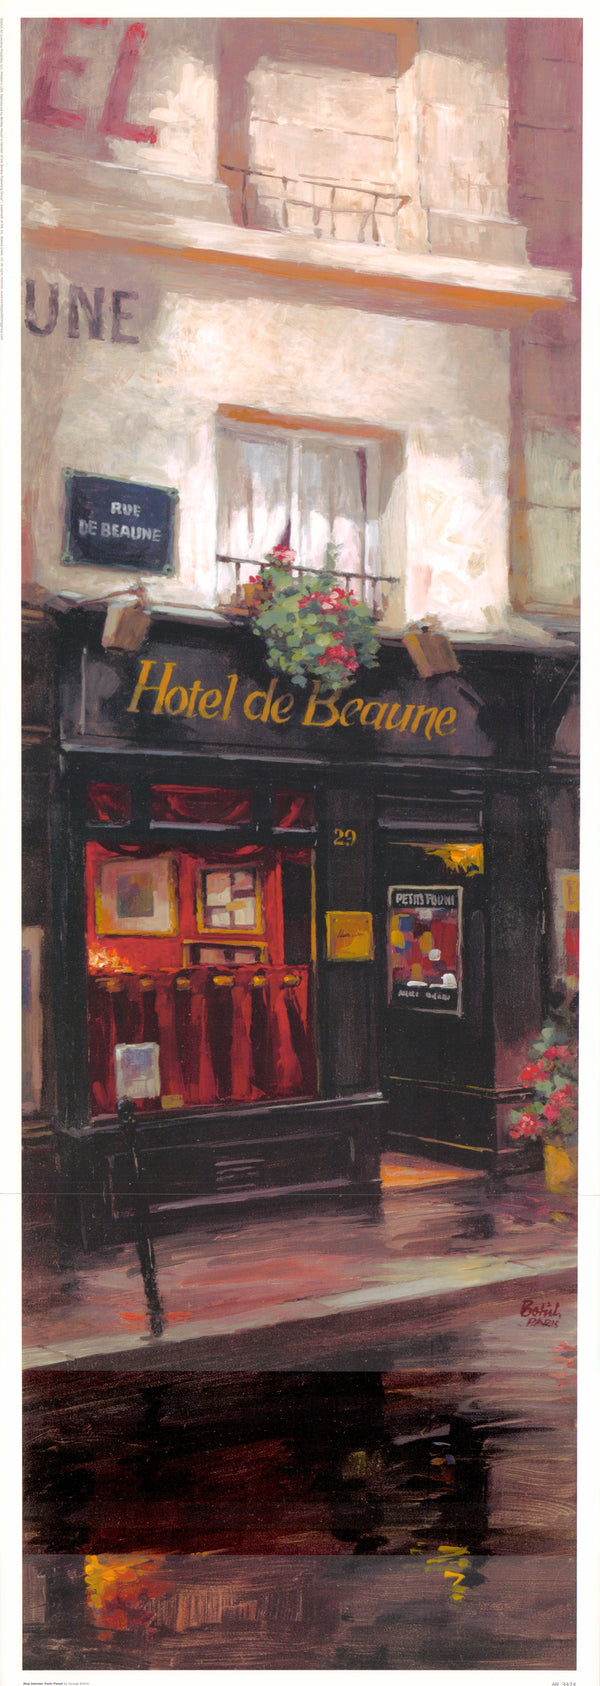 Red Interior Paris Panel by George Botich - 13 X 37 Inches (Art Print)